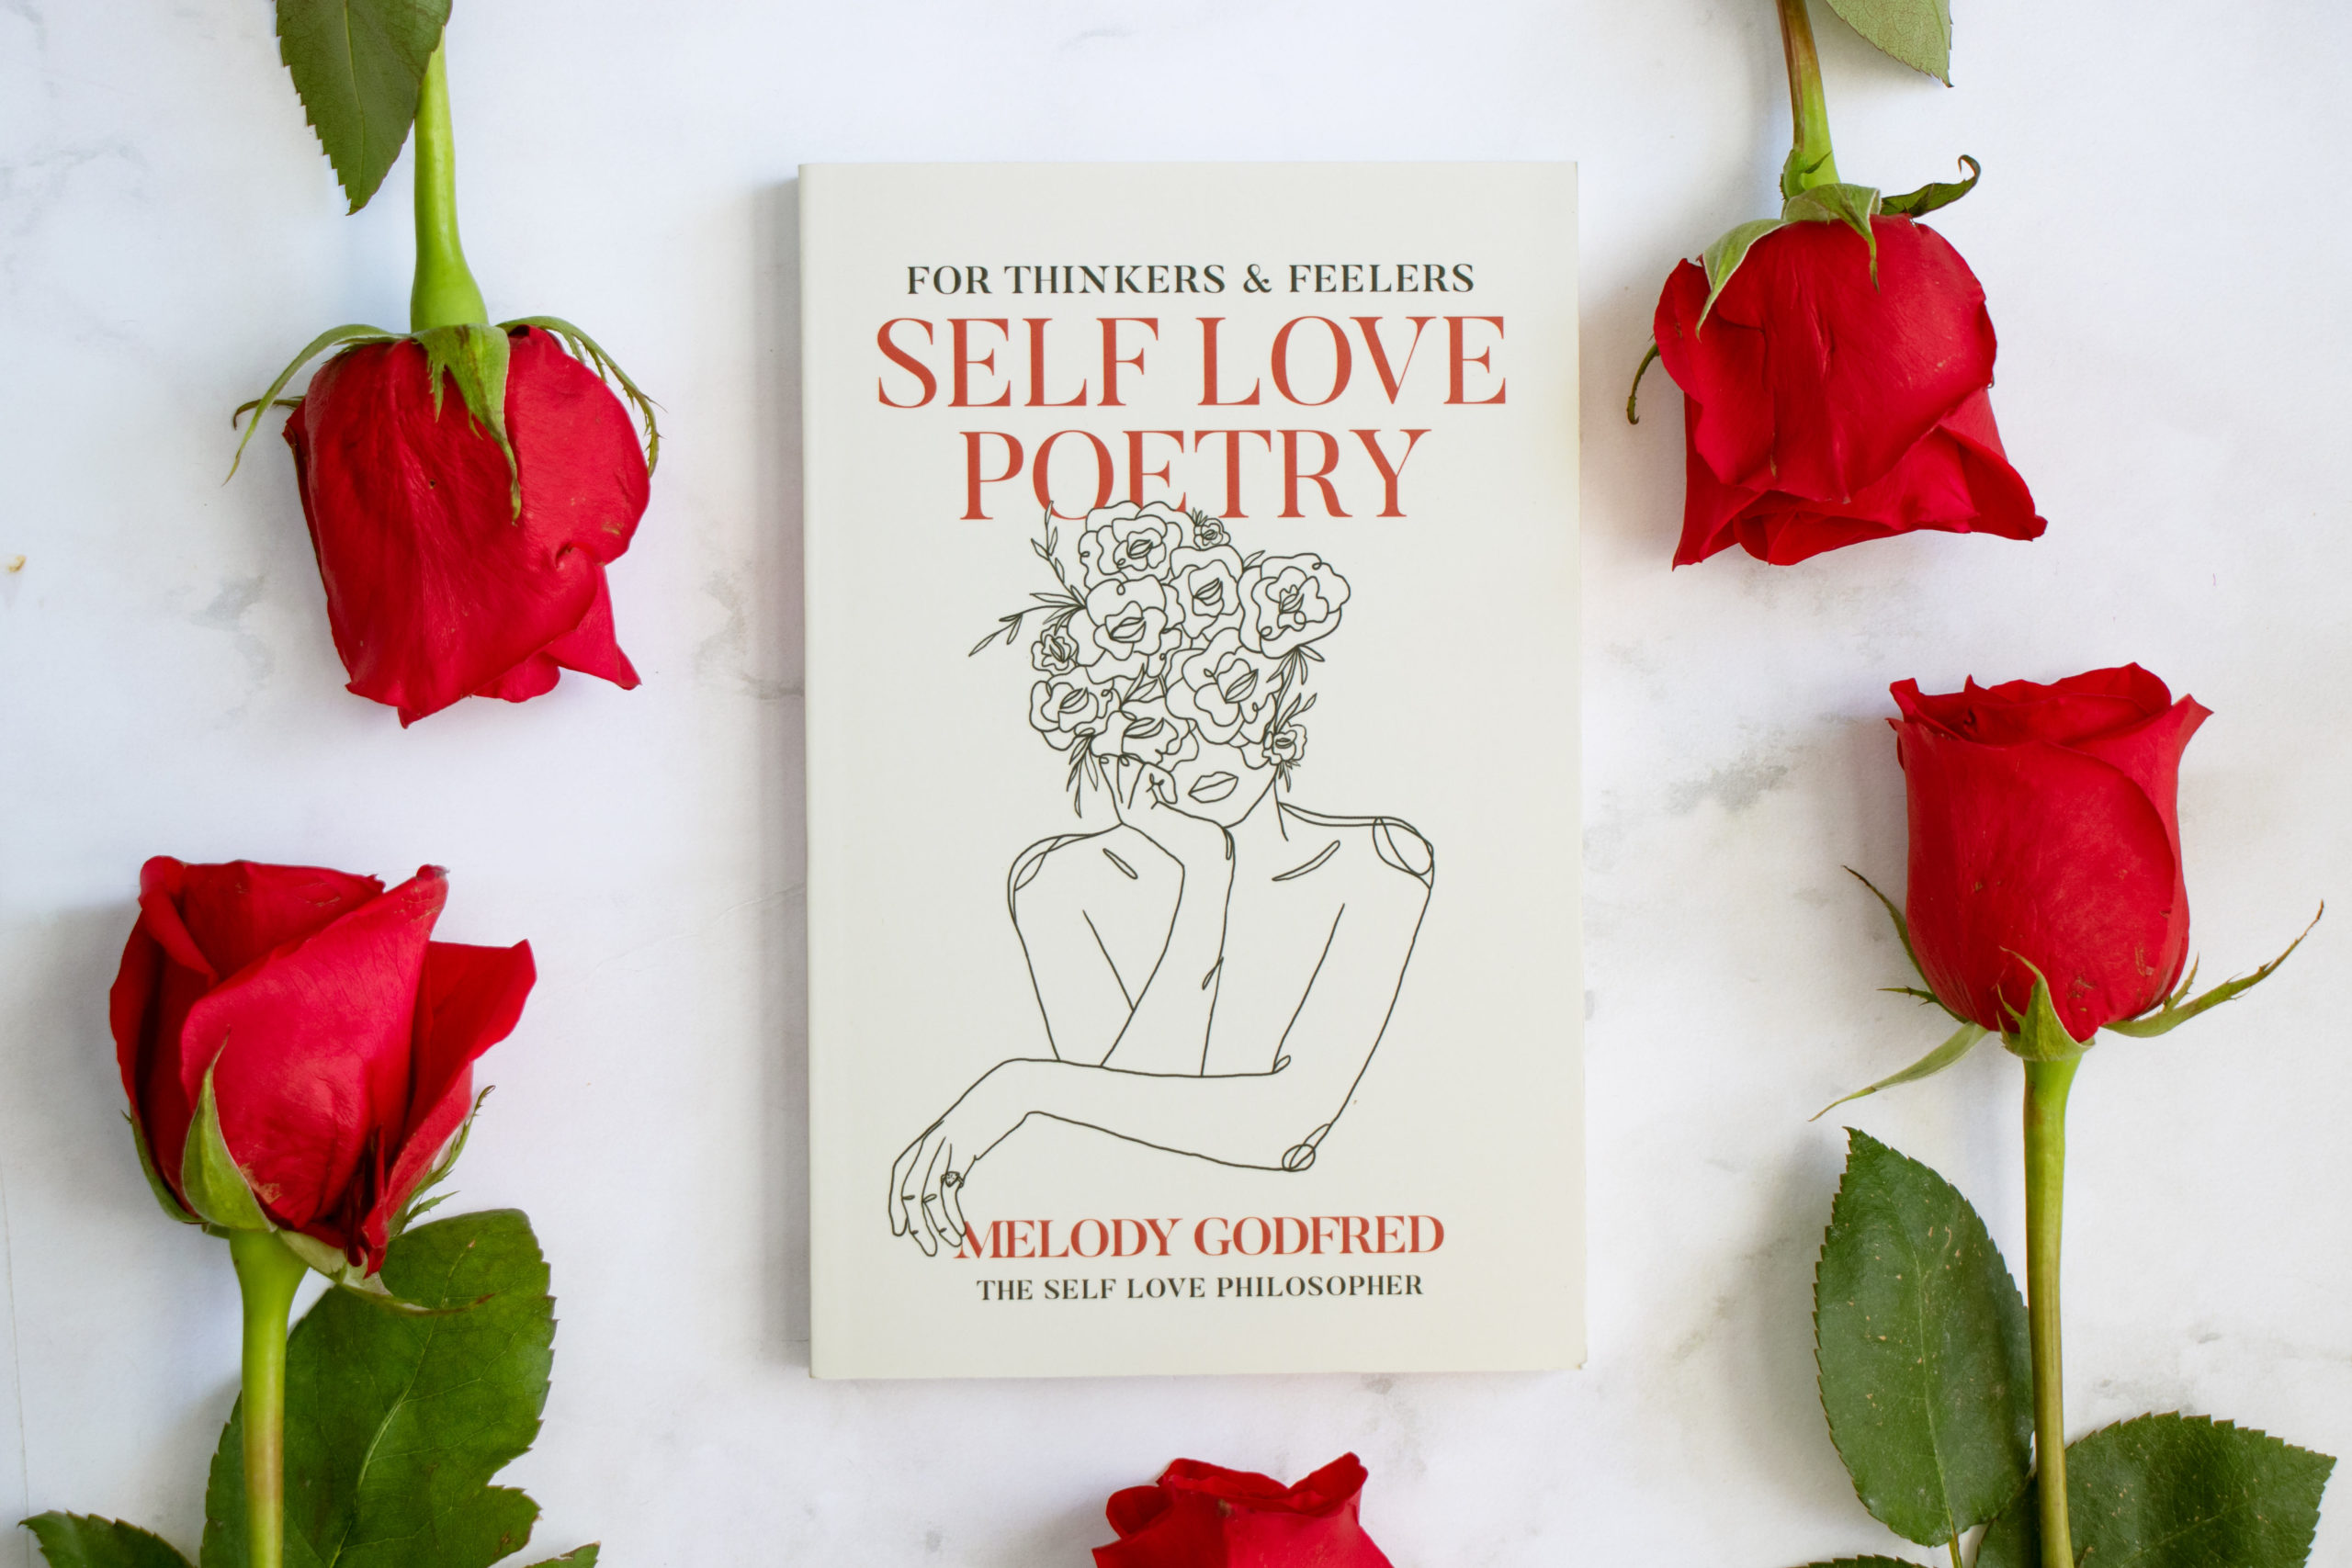 Self Love Poetry by Melody Godfred